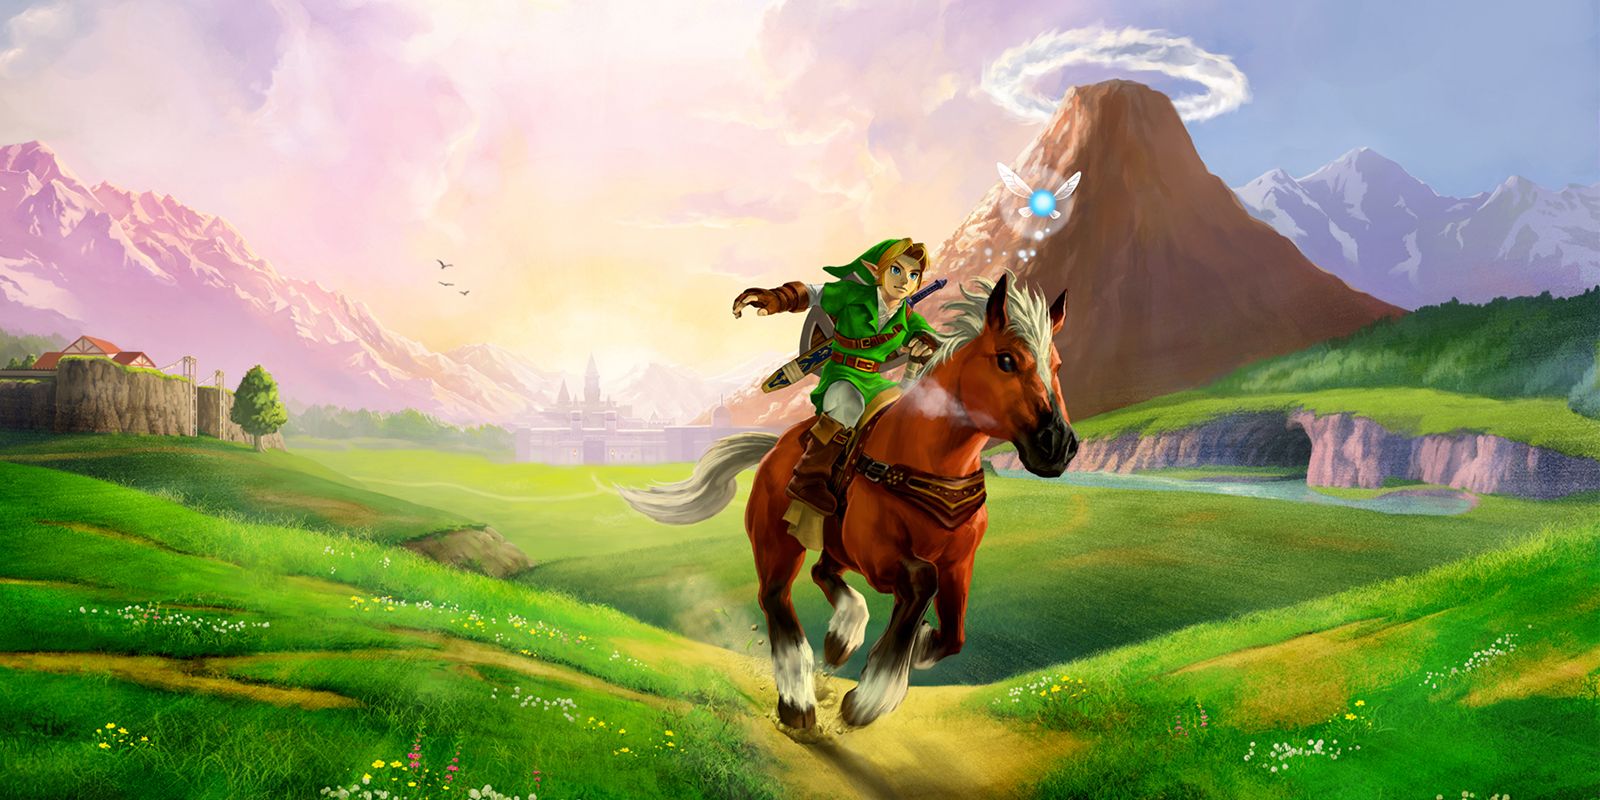 Ocarina Of Time Is Better Than Breath Of Wild